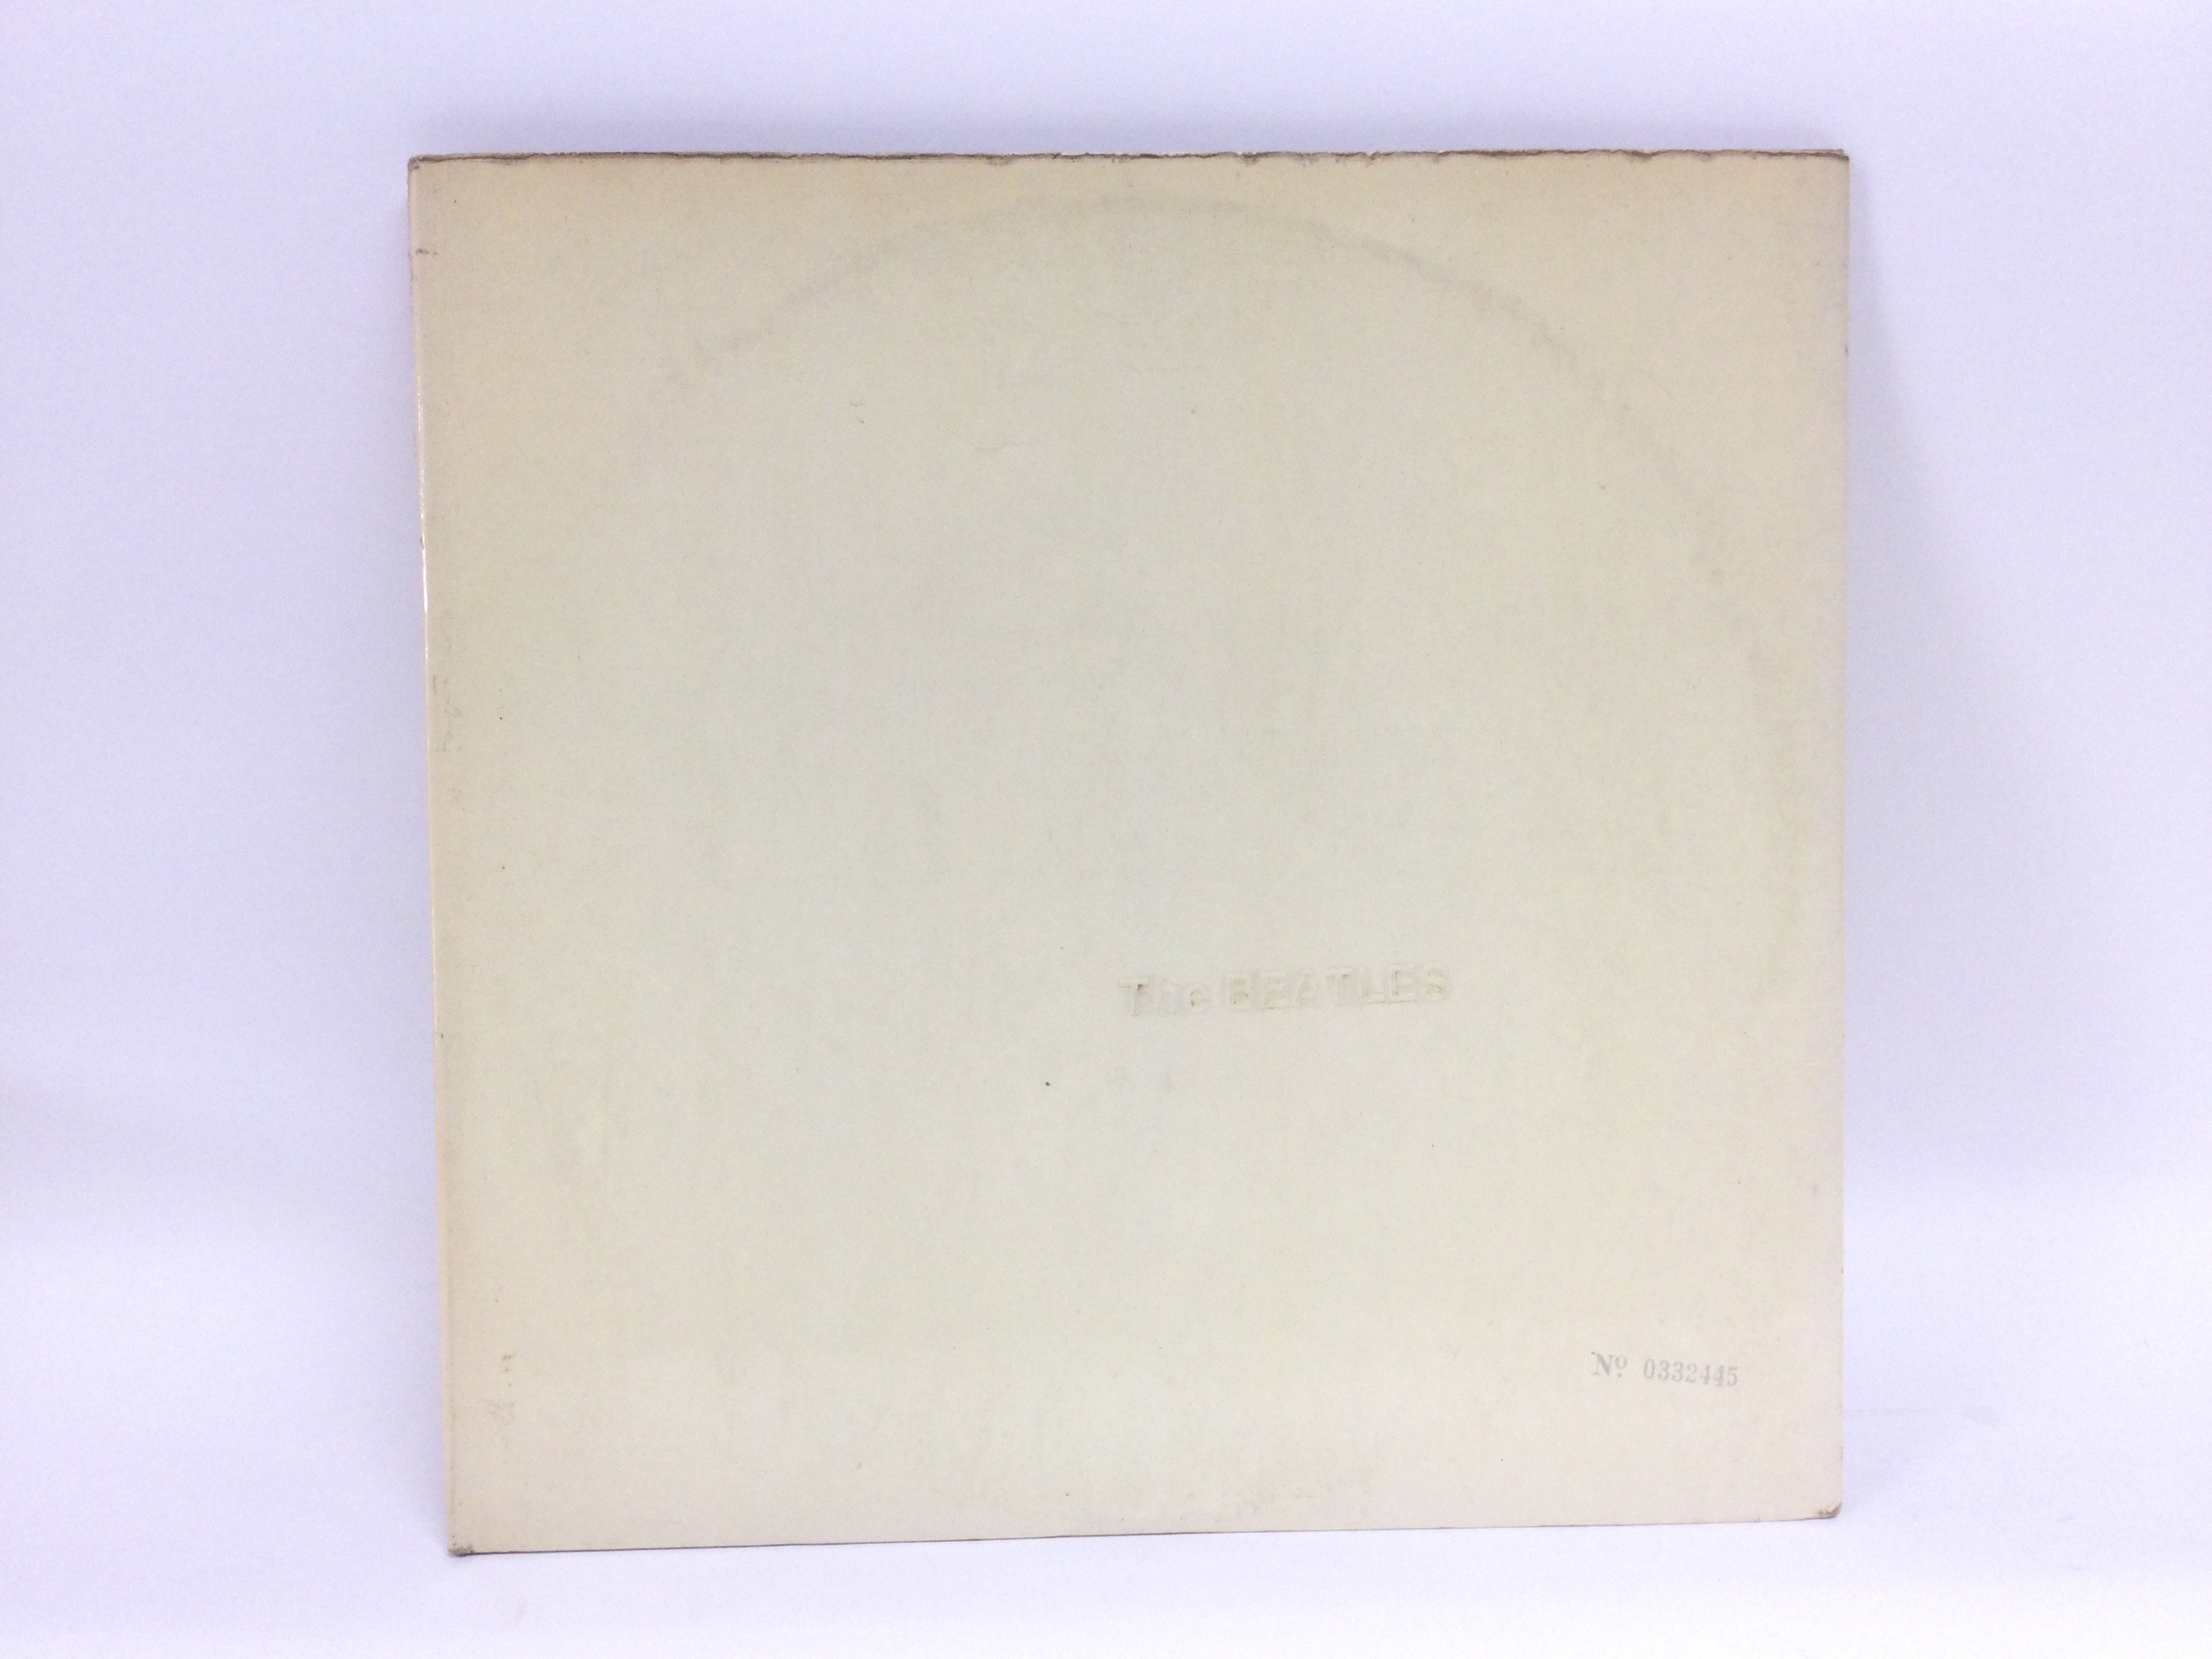 A numbered Beatles 'White Album', no. 0332445, top